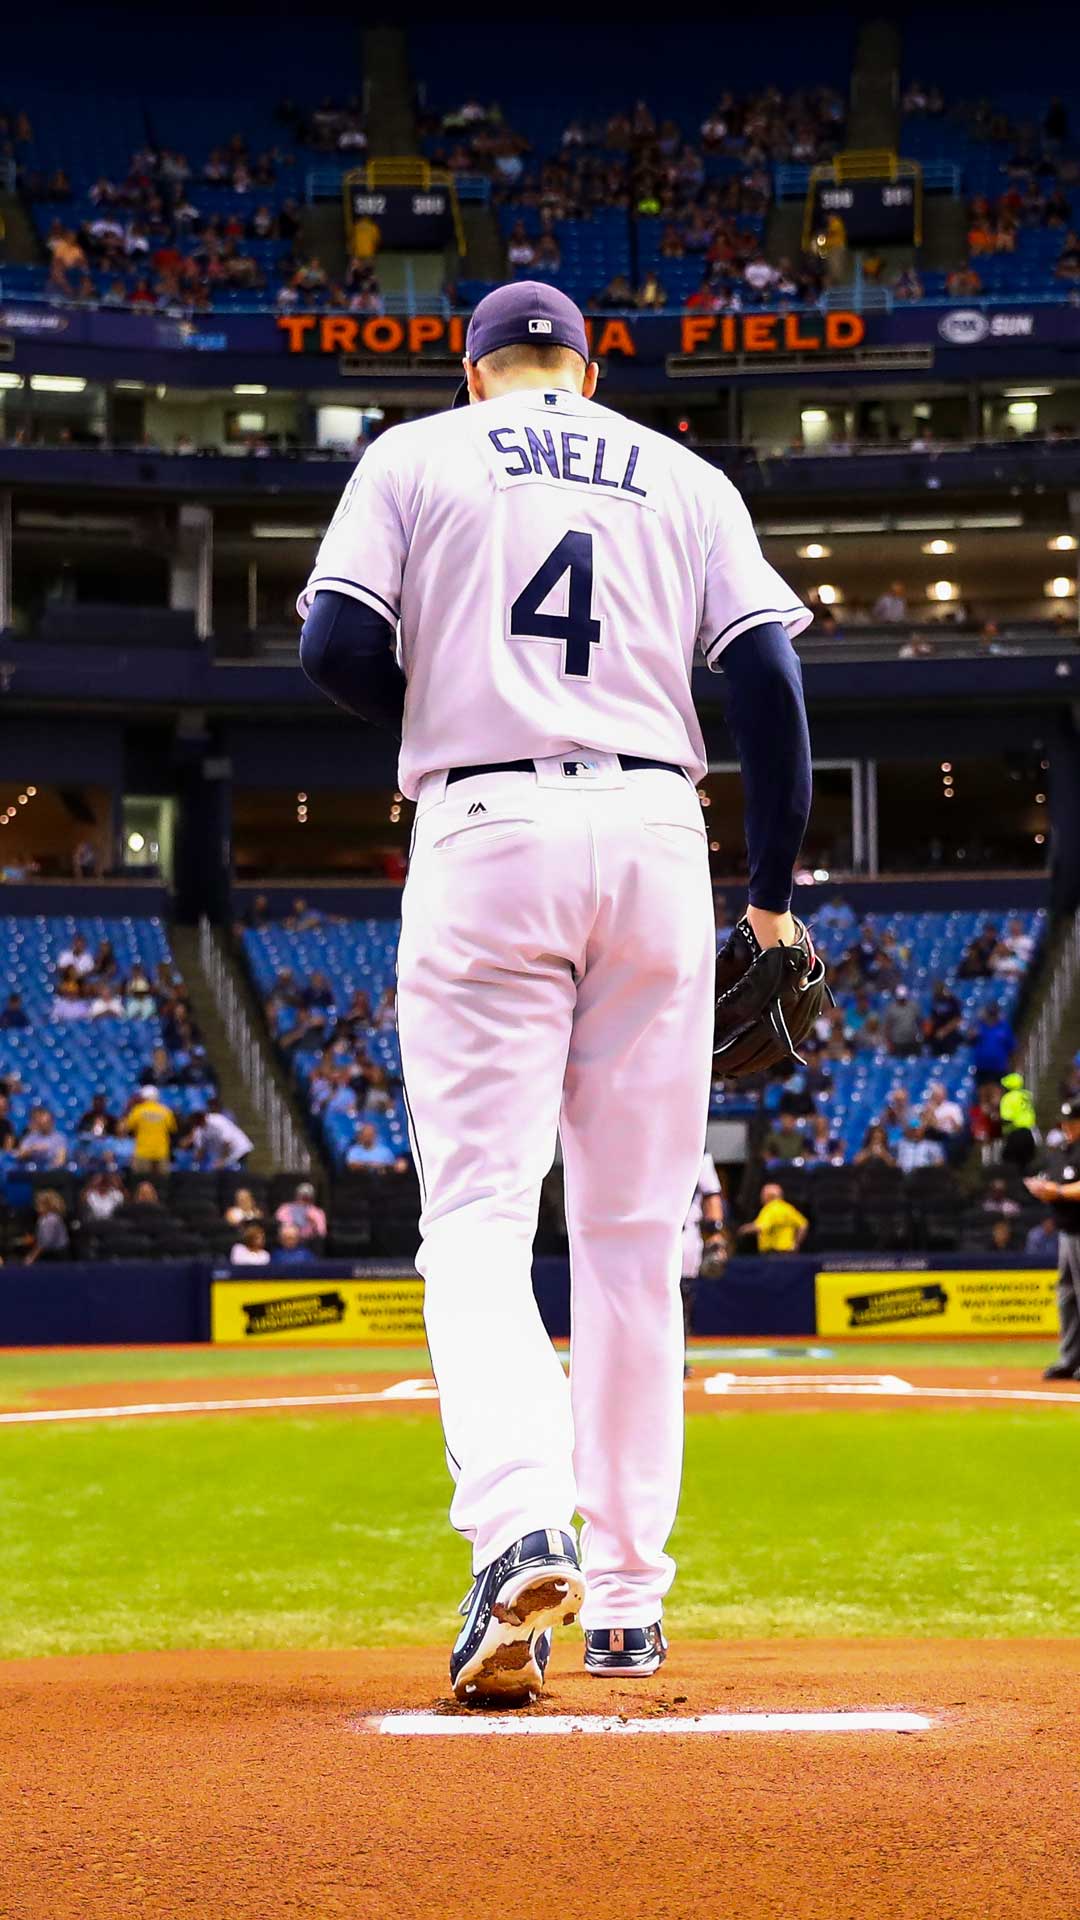 Cyzilla Snell. Tampa Bay Rays